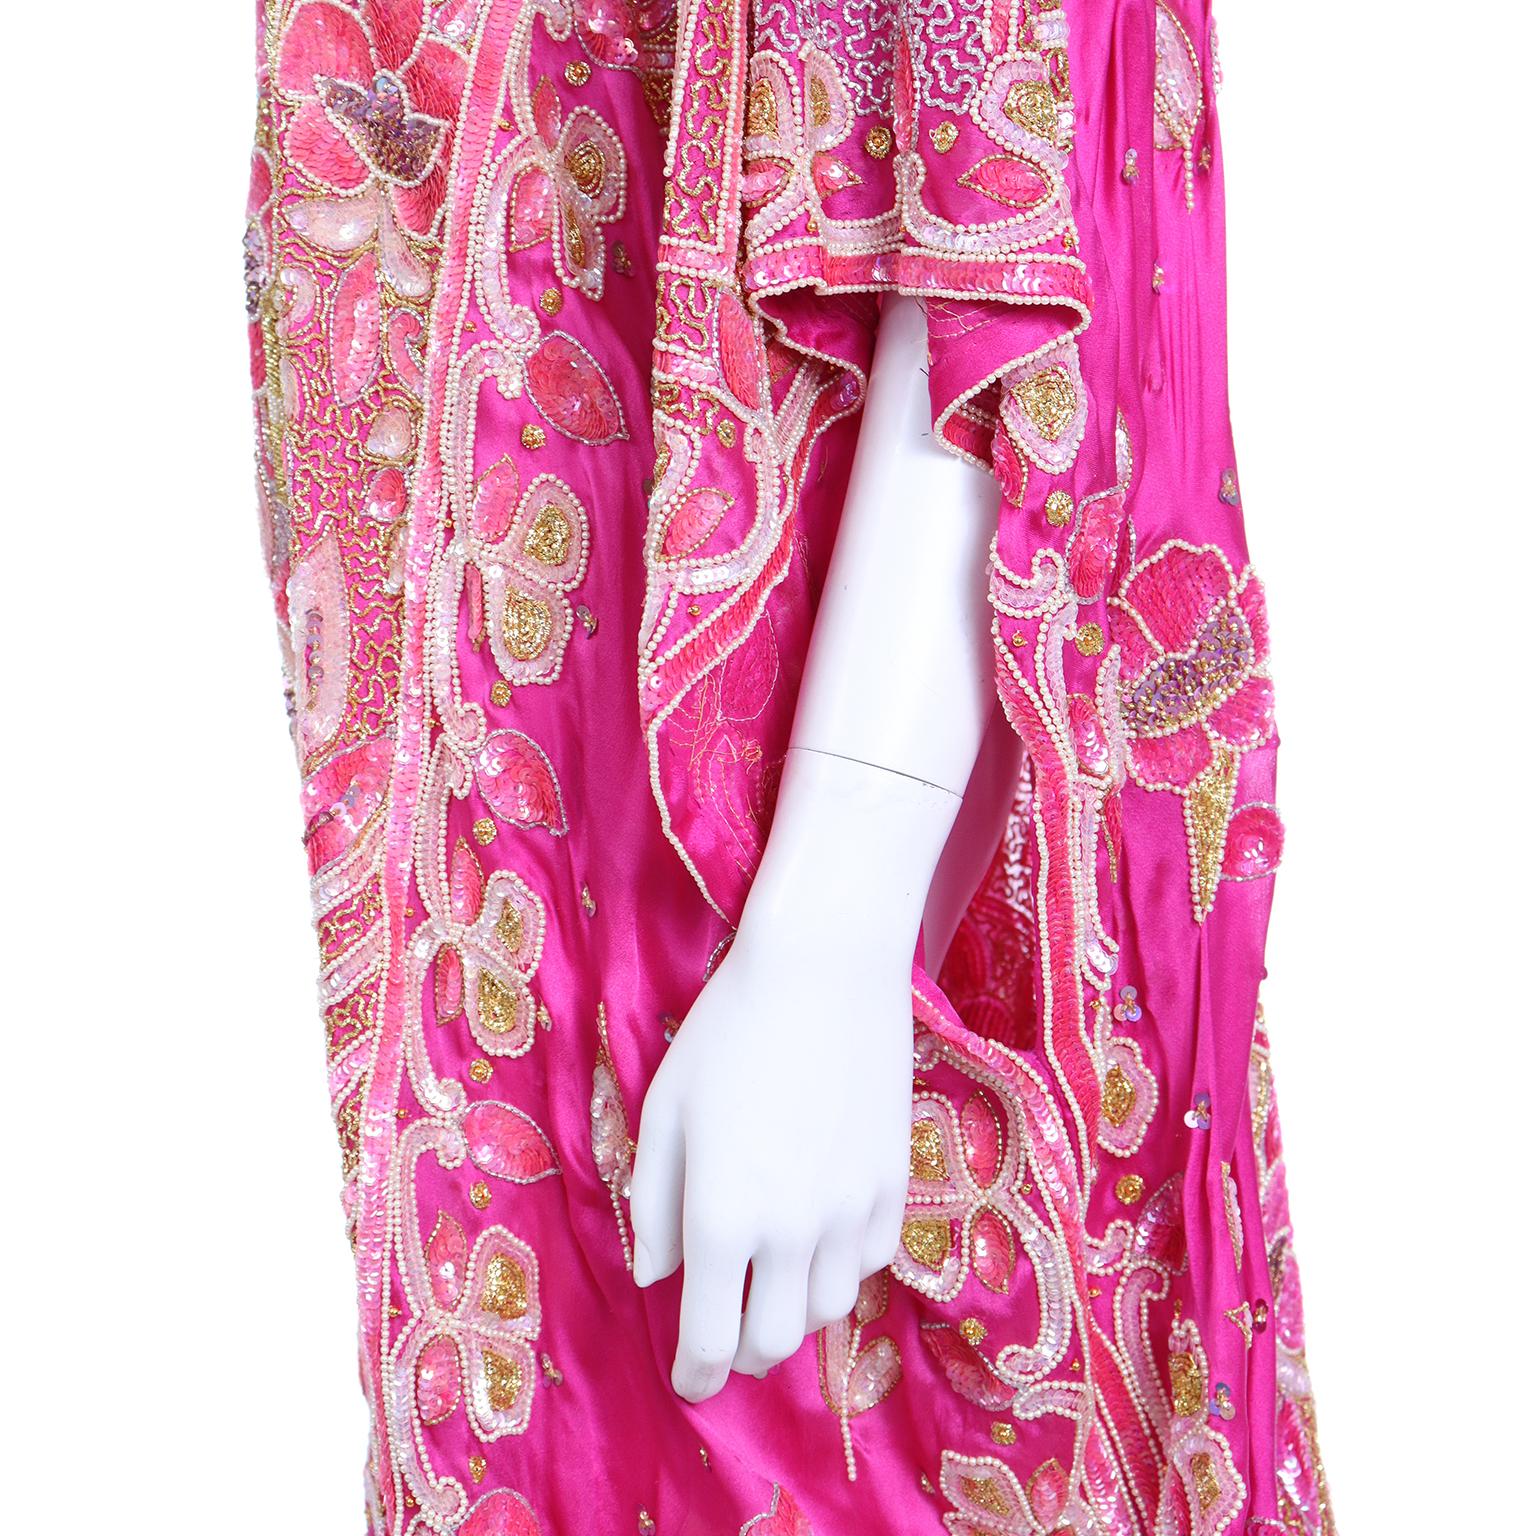 Vintage Floral Hot Pink Caftan Dress With Raised Gold Metallic Beading & Sequins 4